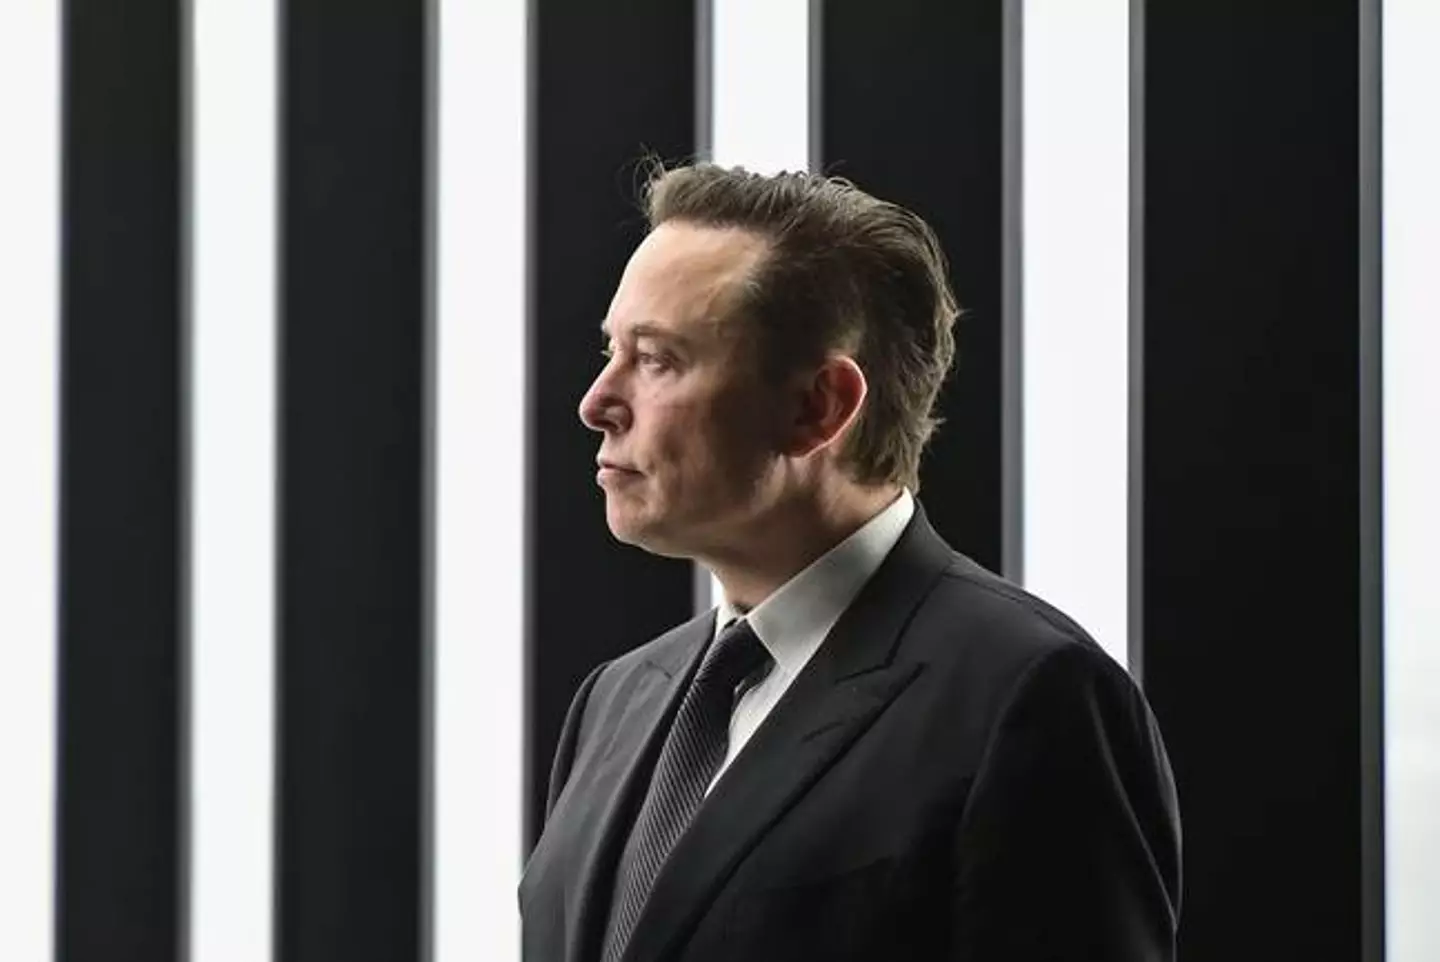 Elon Musk is now the richest man in the world.